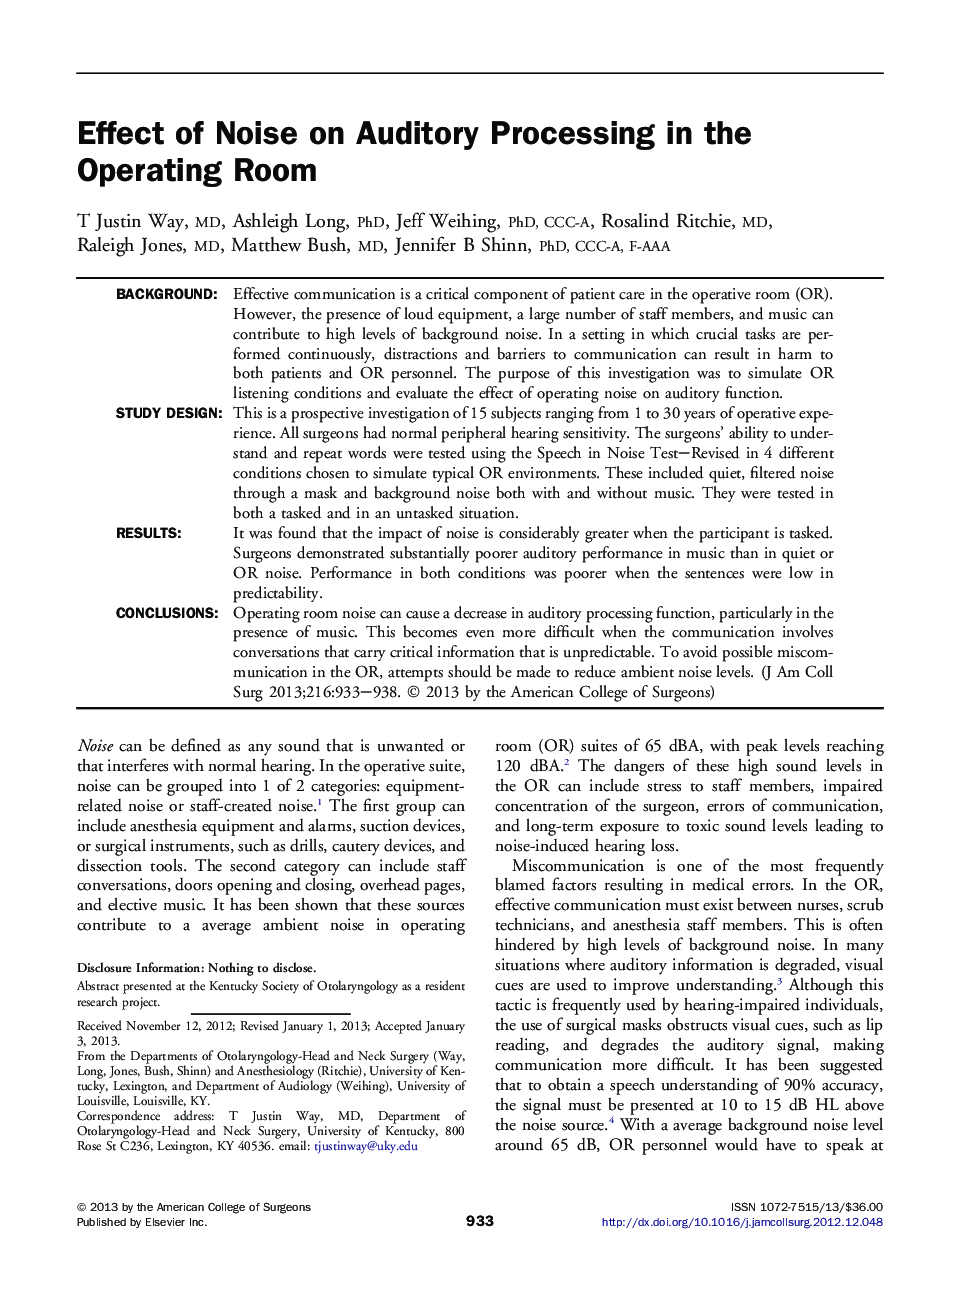 Effect of Noise on Auditory Processing in the Operating Room 